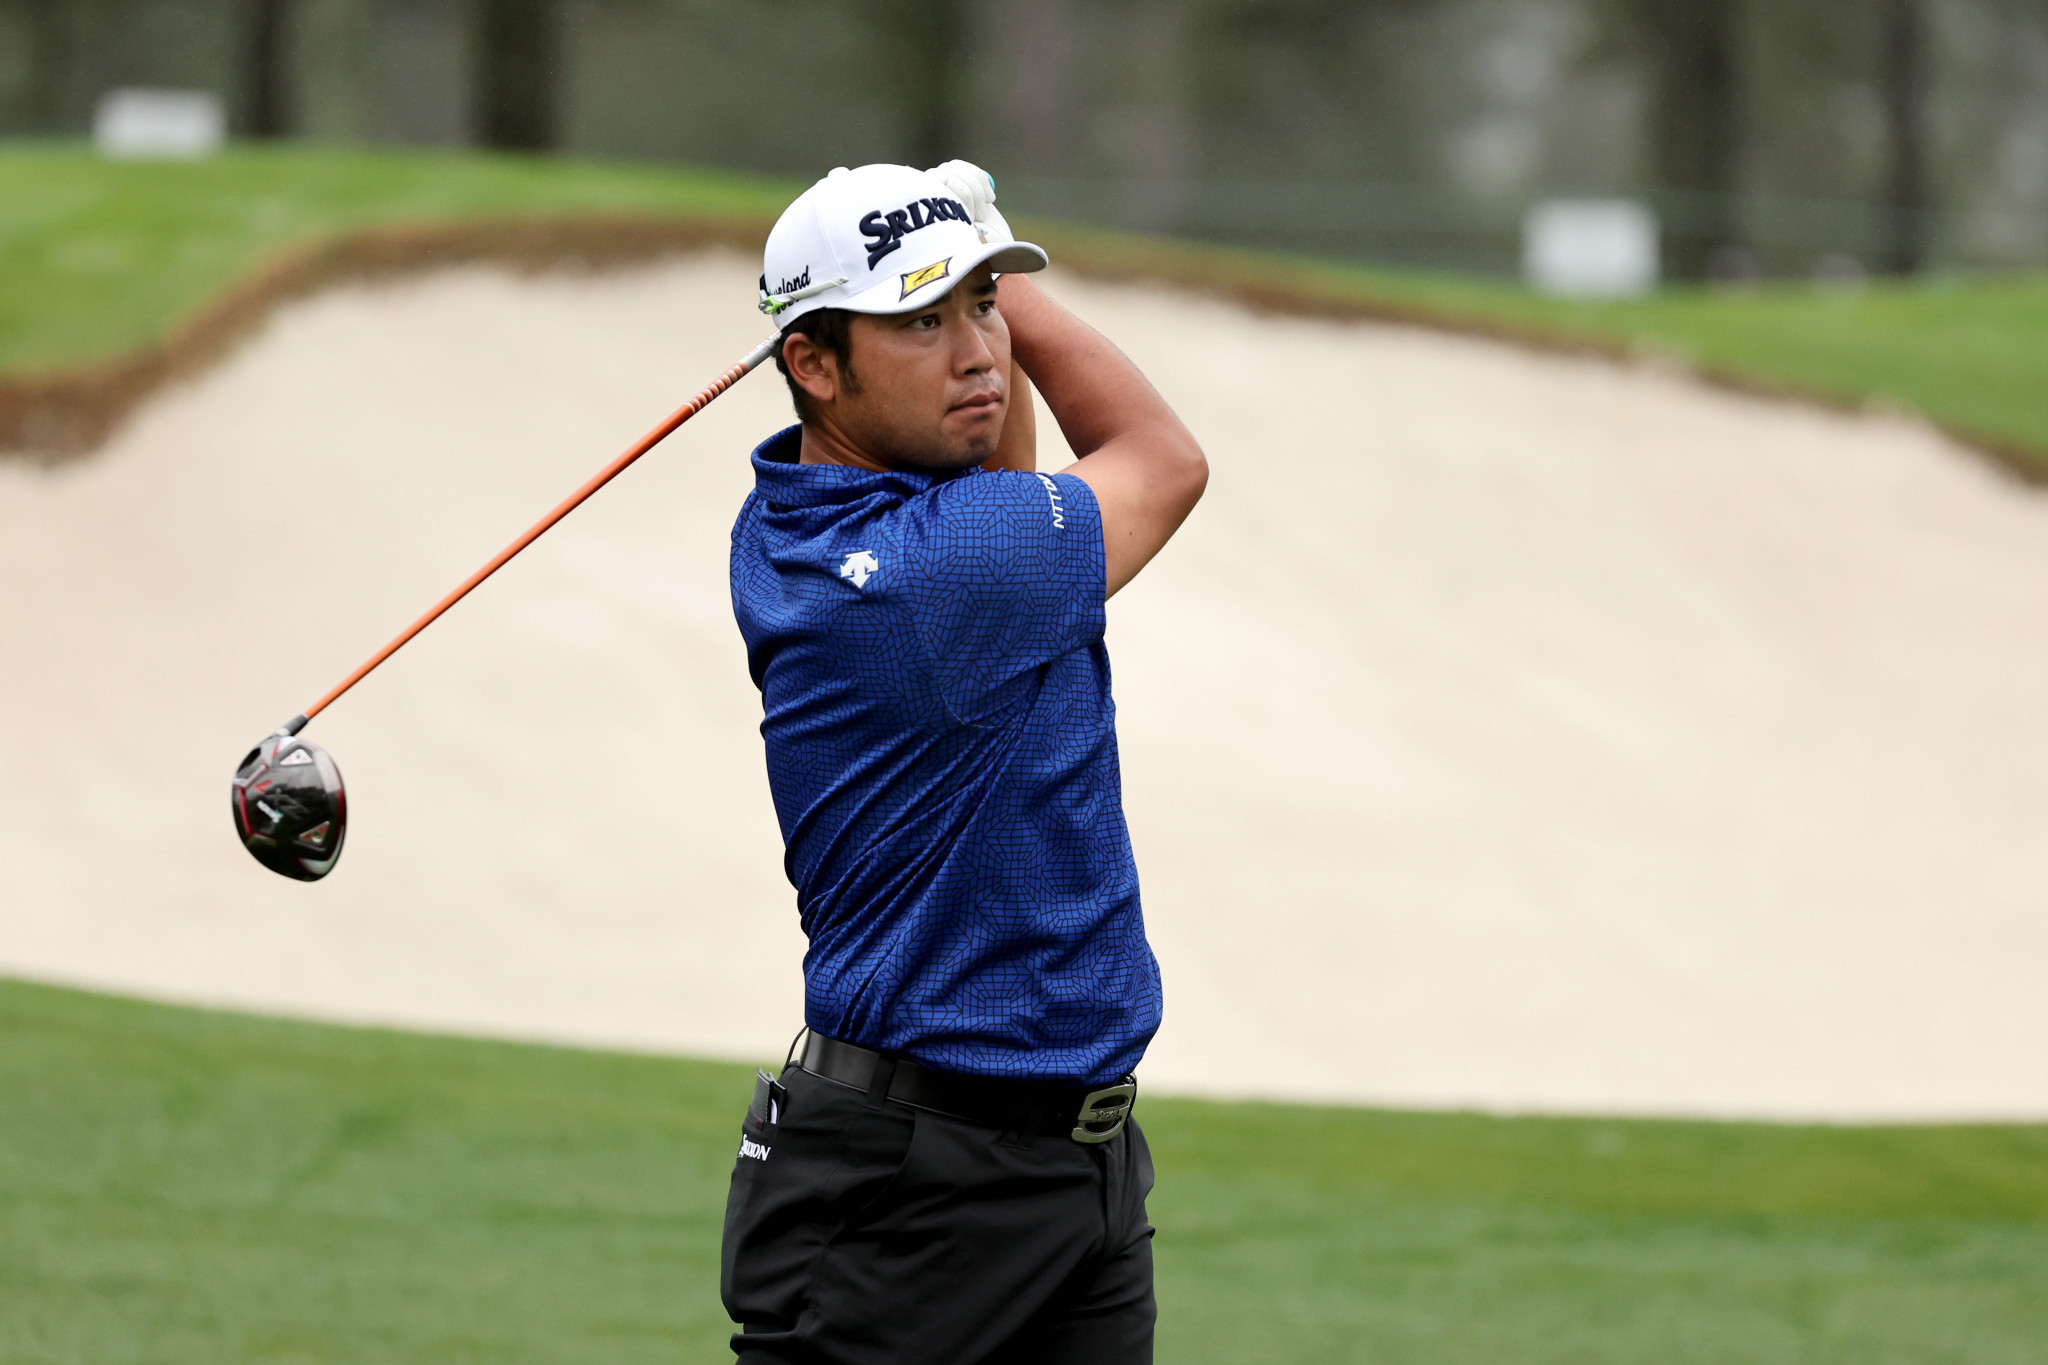 Hideki Matsuyama will seek a repeat victory at the Augusta National Golf Club ©Getty Images